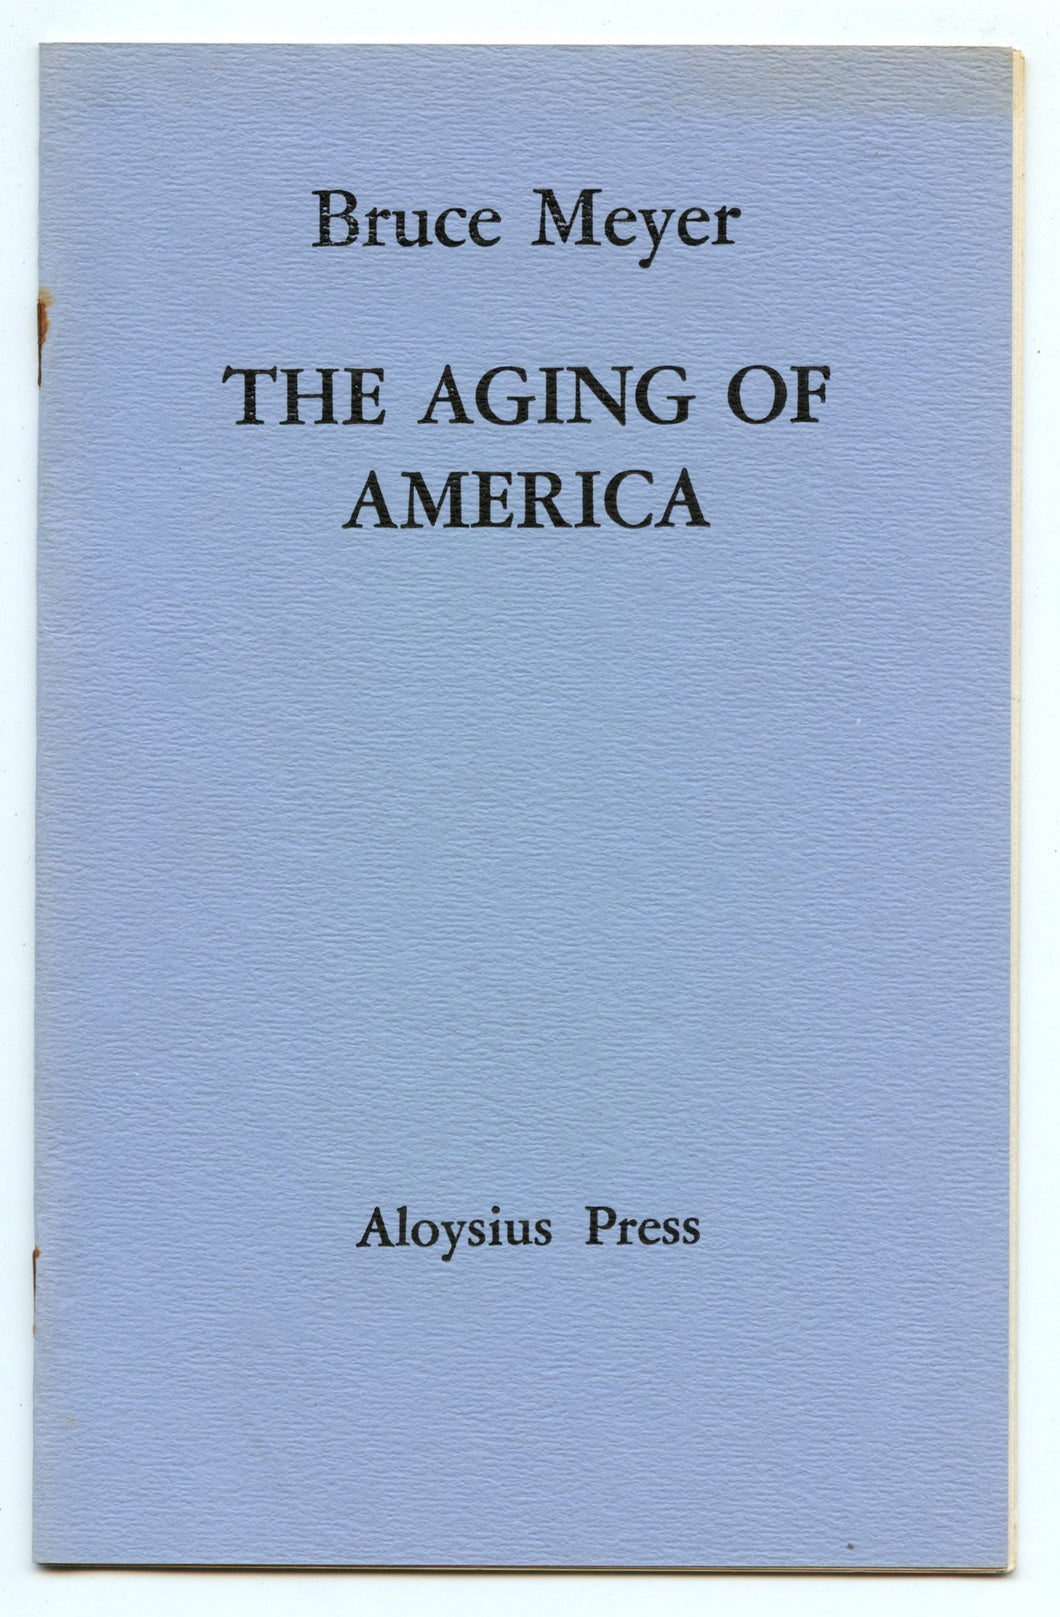 The Aging of America